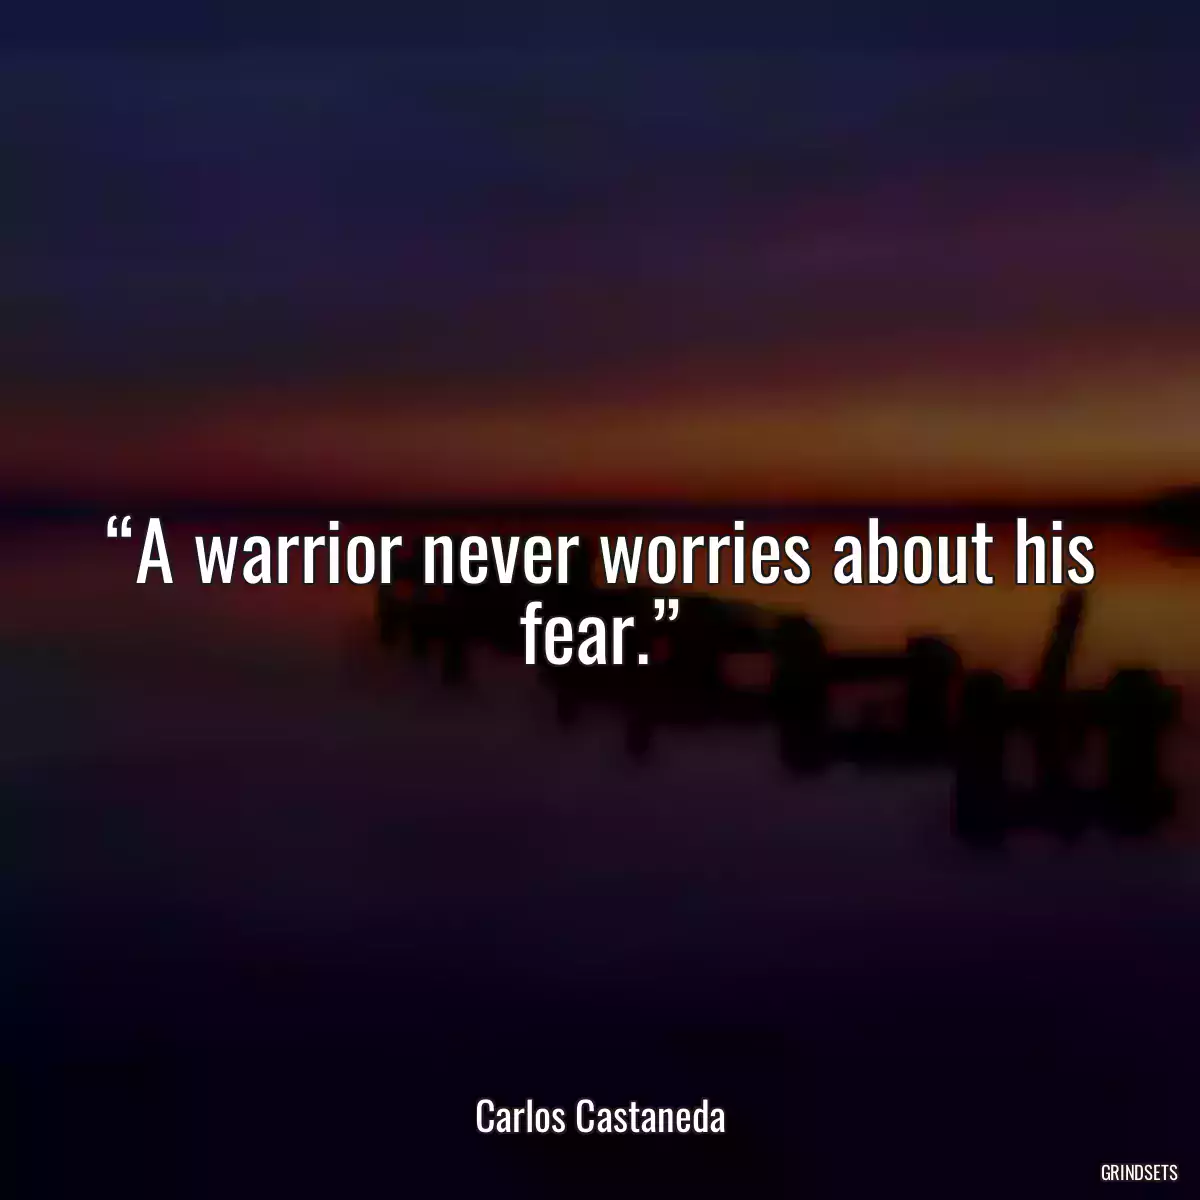 “A warrior never worries about his fear.”